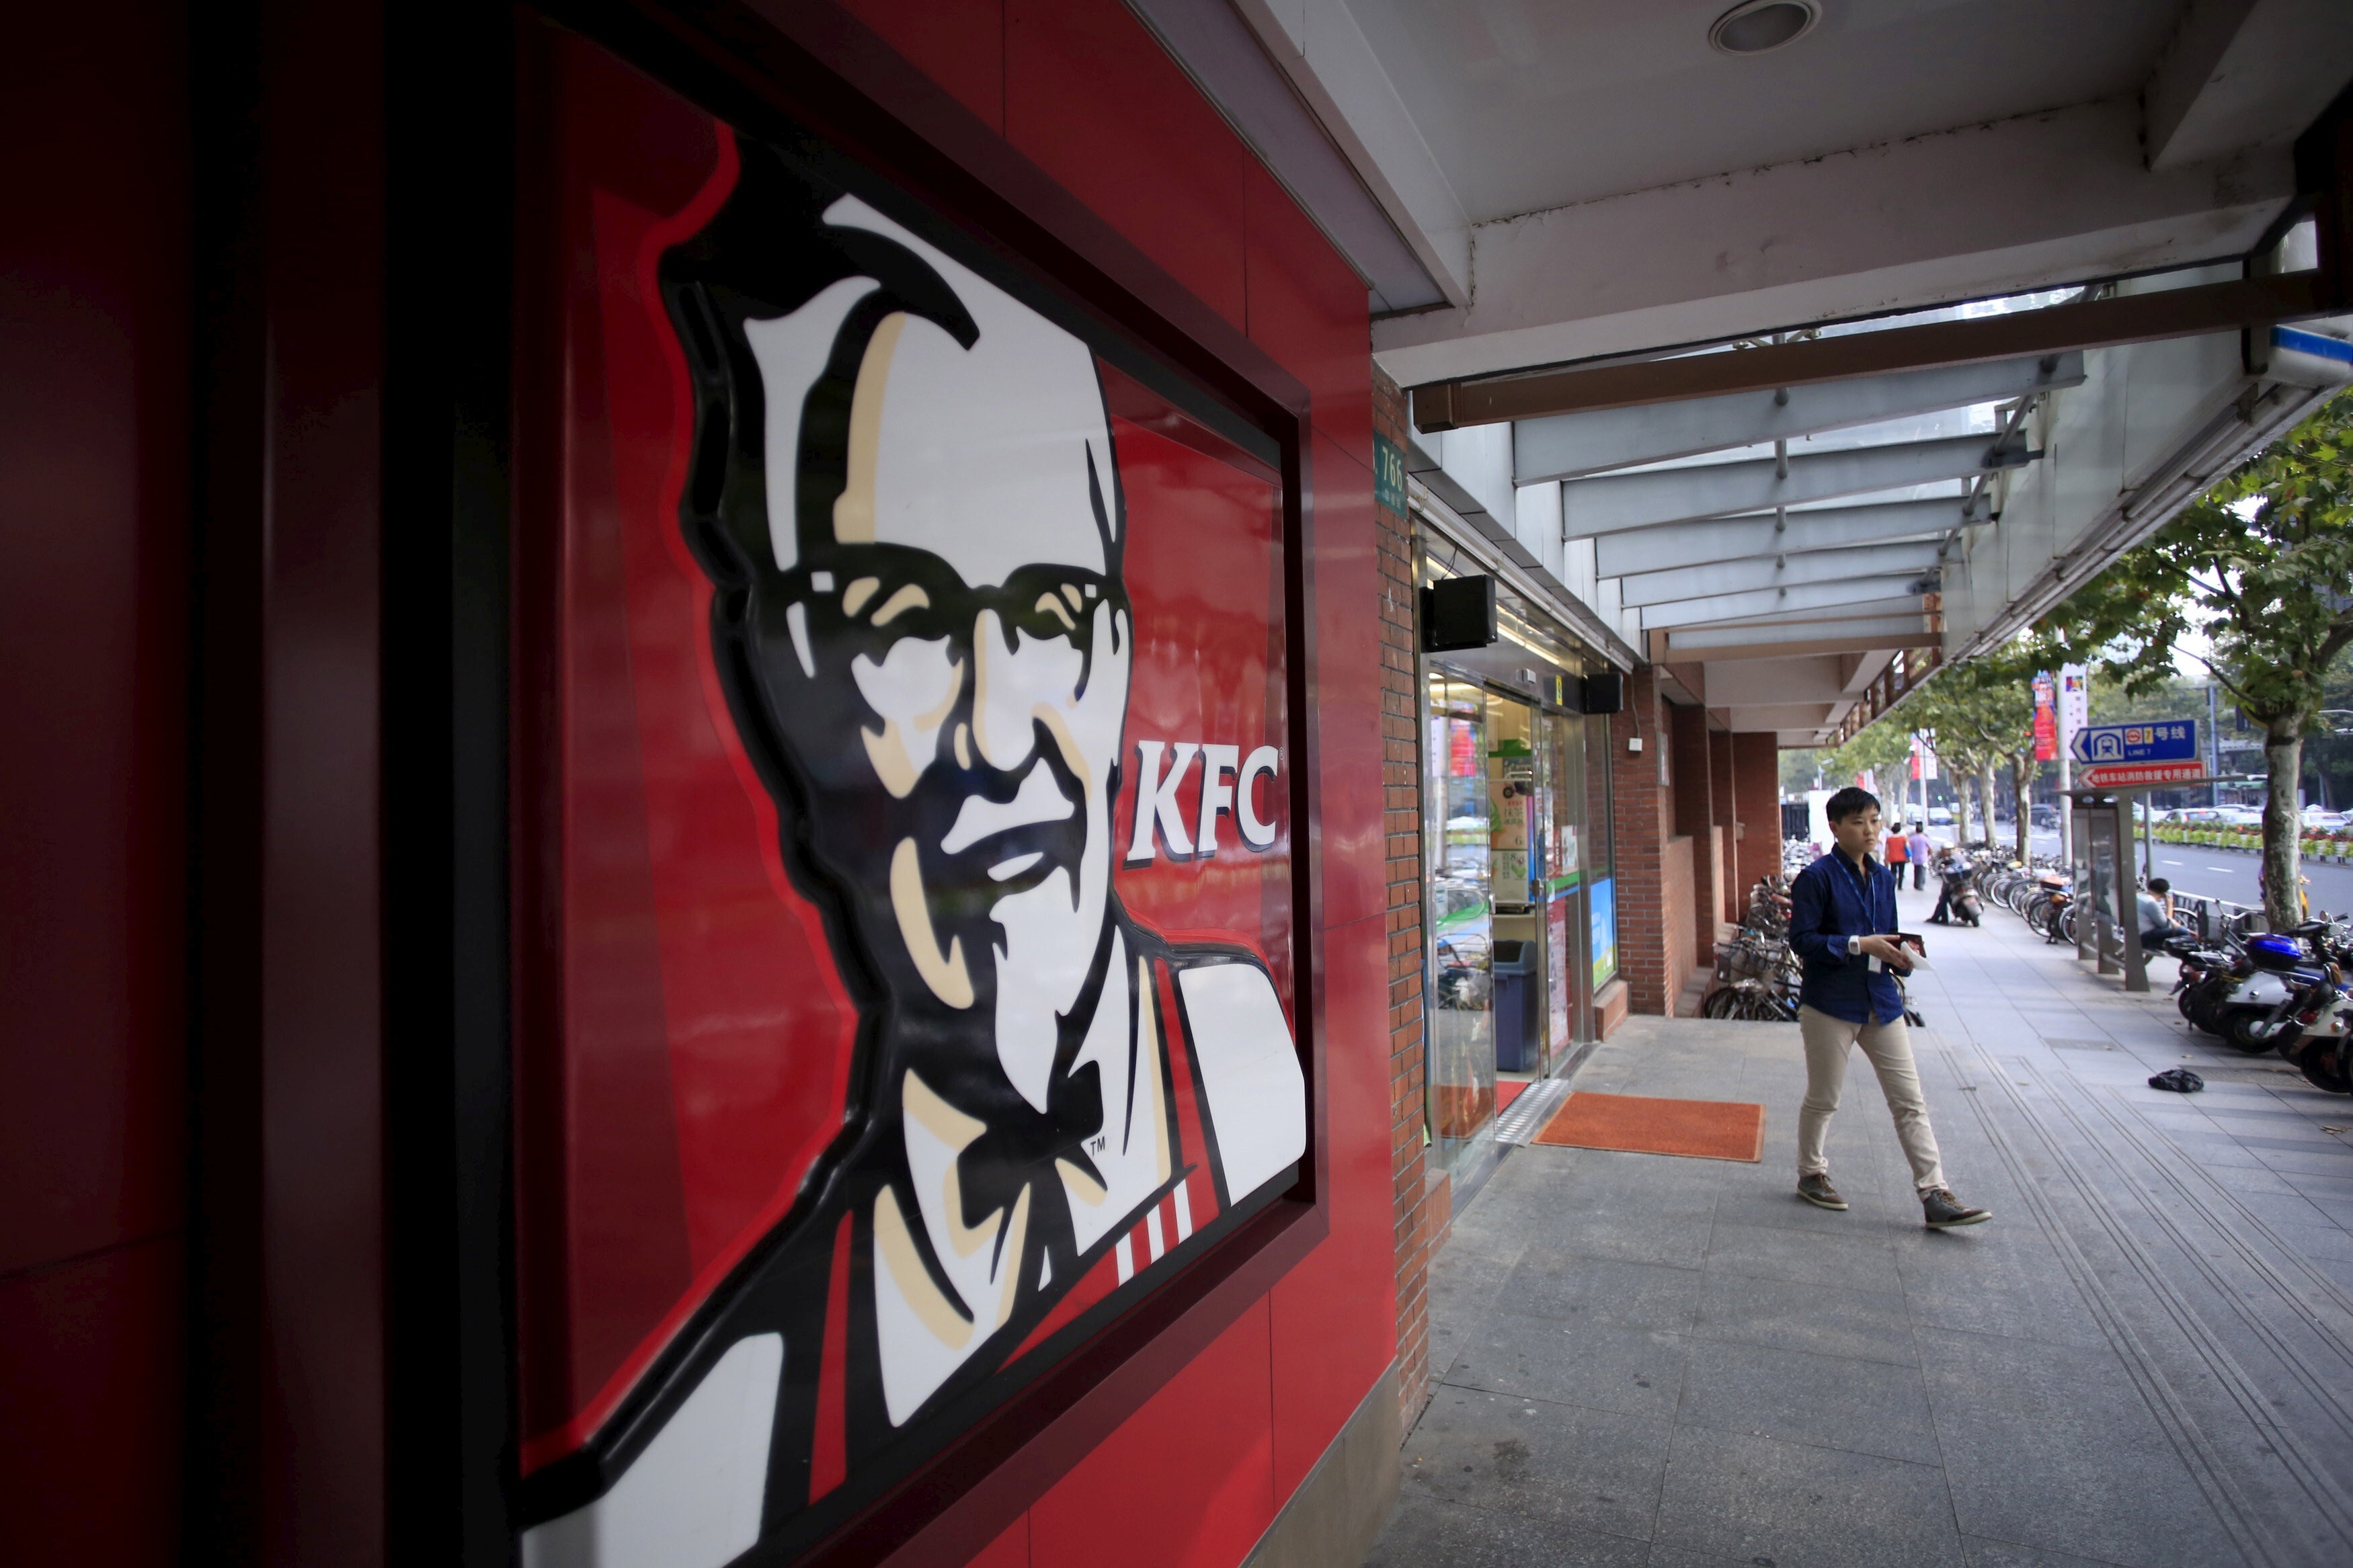 Non-degradable plastic bags used in over half of its KFC restaurants will be replaced with paper bags or biodegradable plastic bags, Yum said. Photo: Reuters